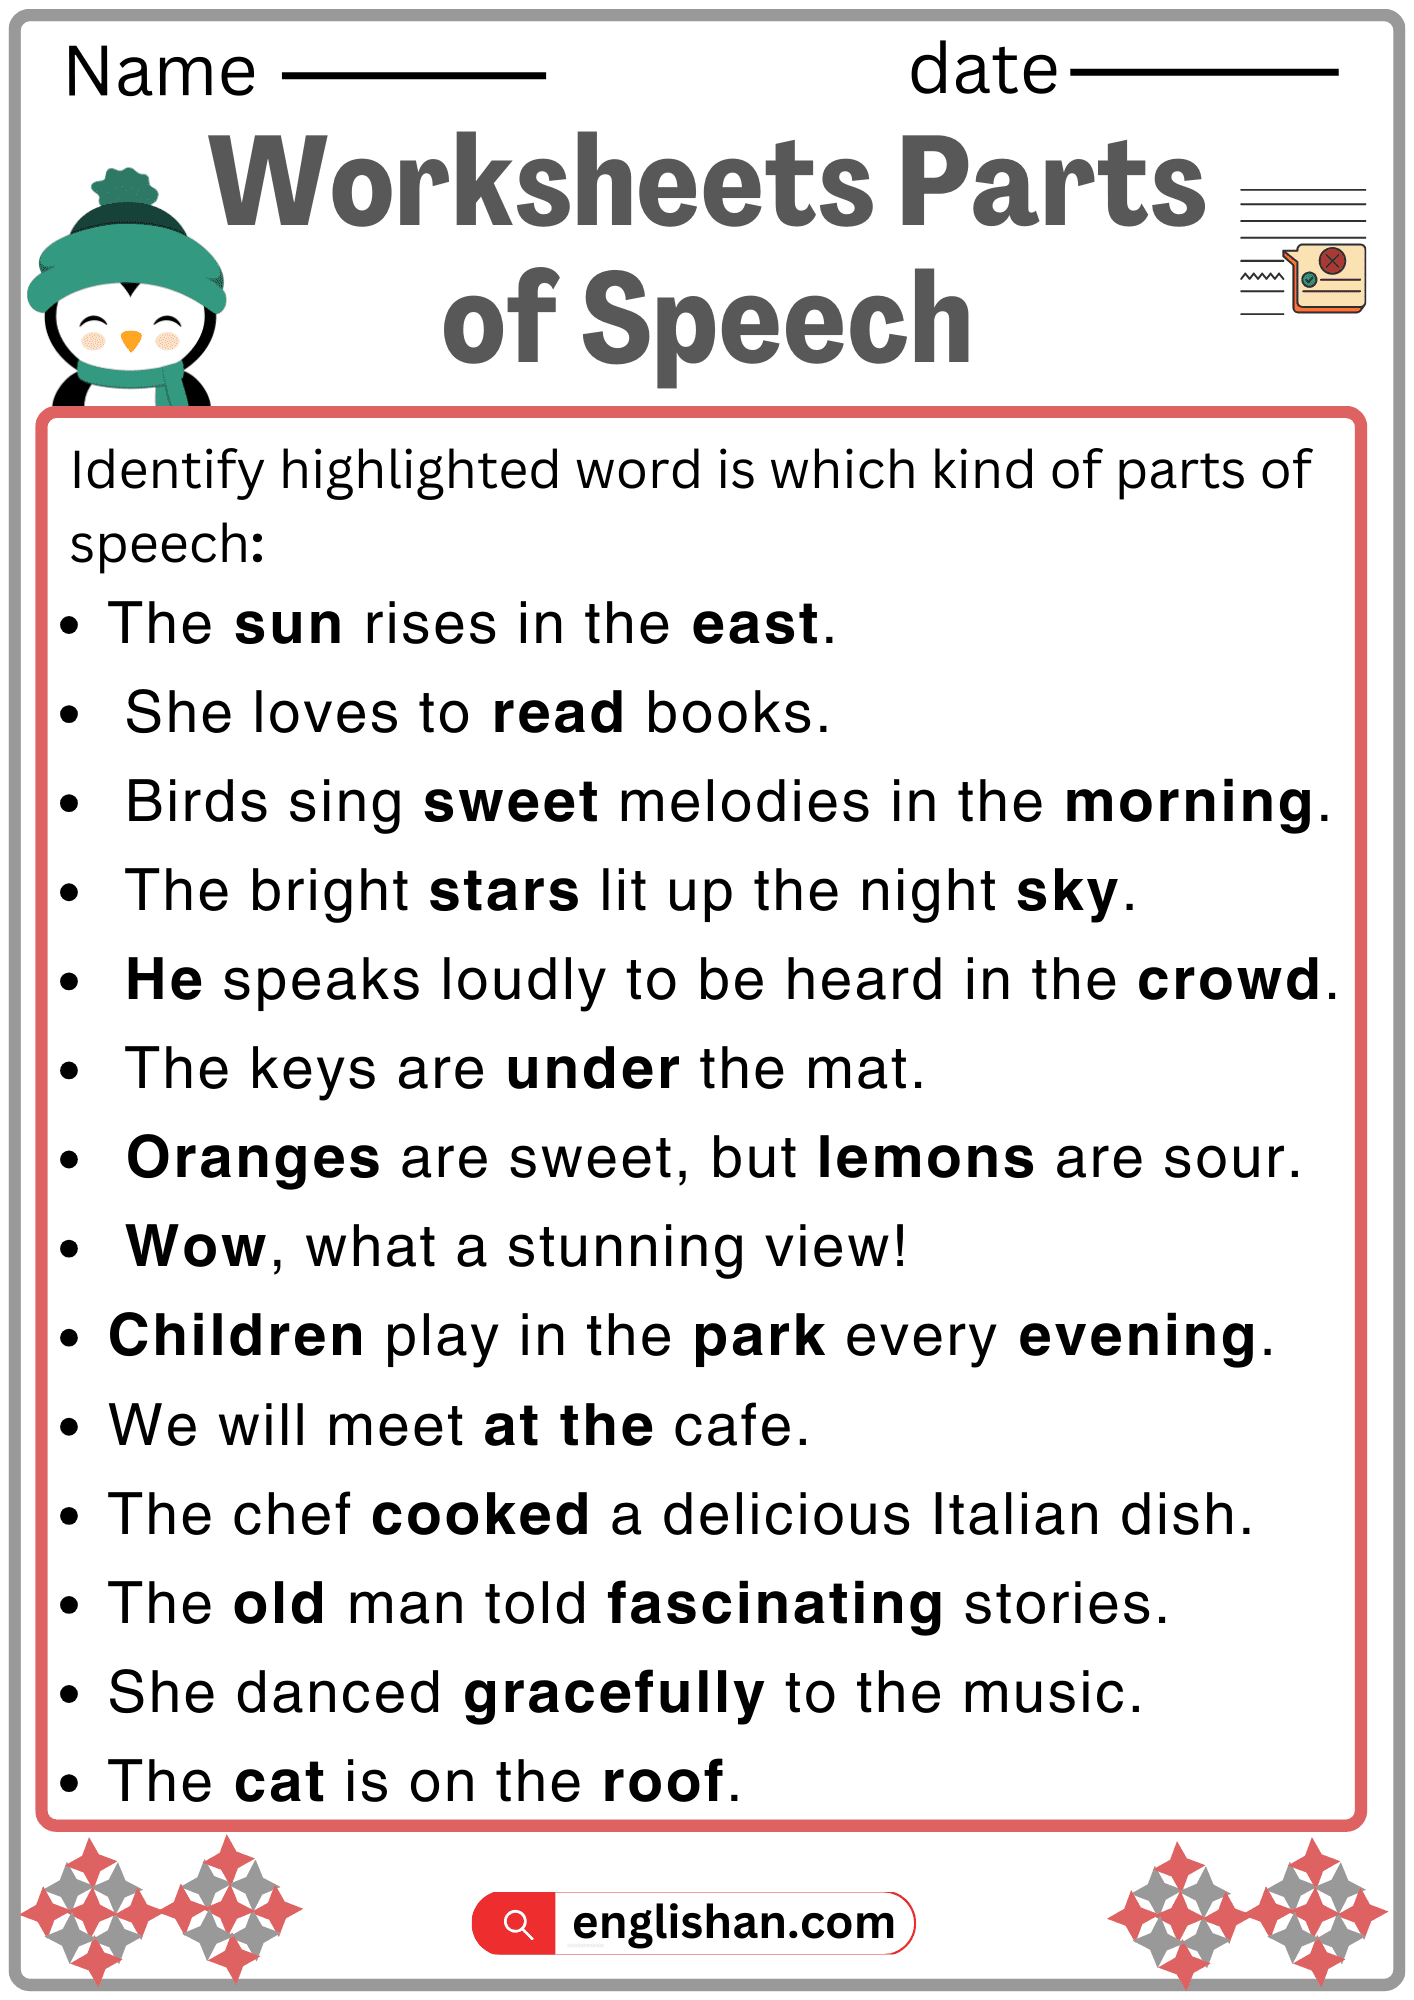 Sentence structure and parts of speech worksheets